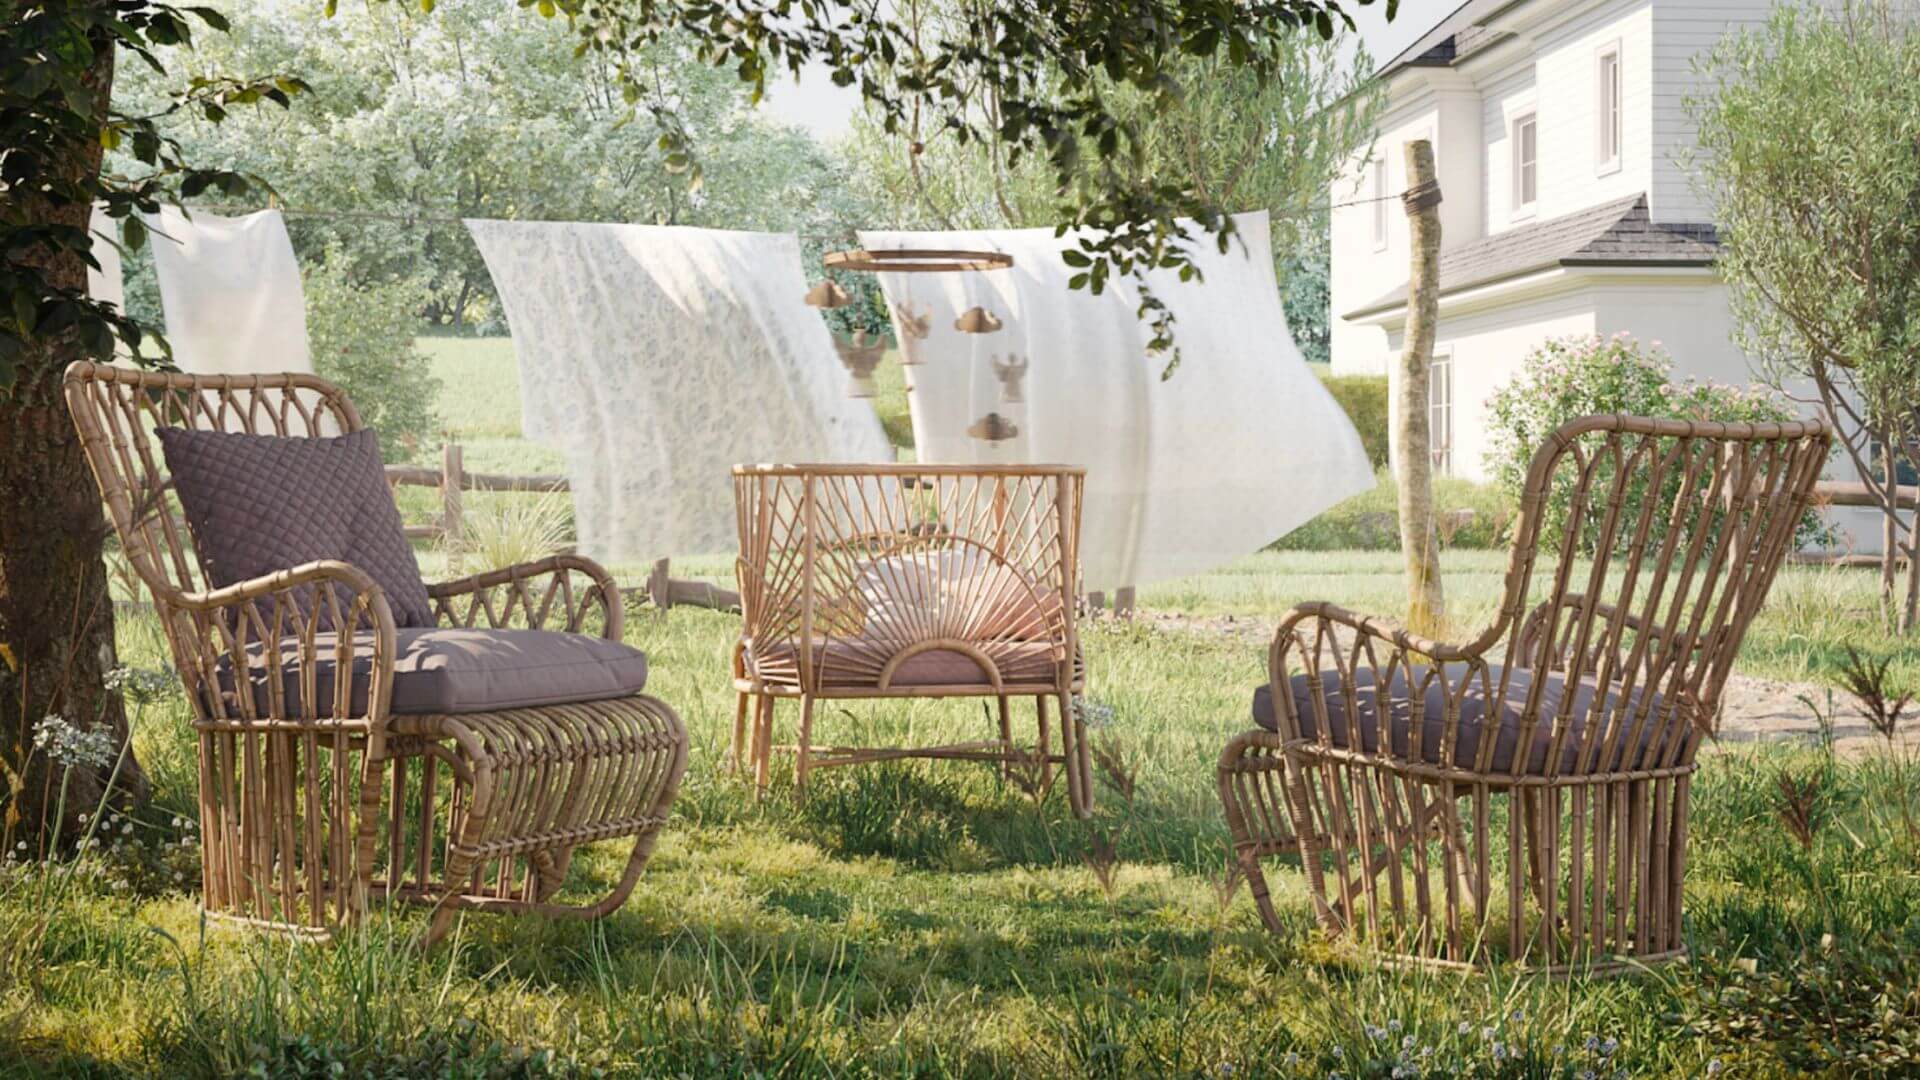 3D Visualization for Wicker Furniture in a Spring Garden